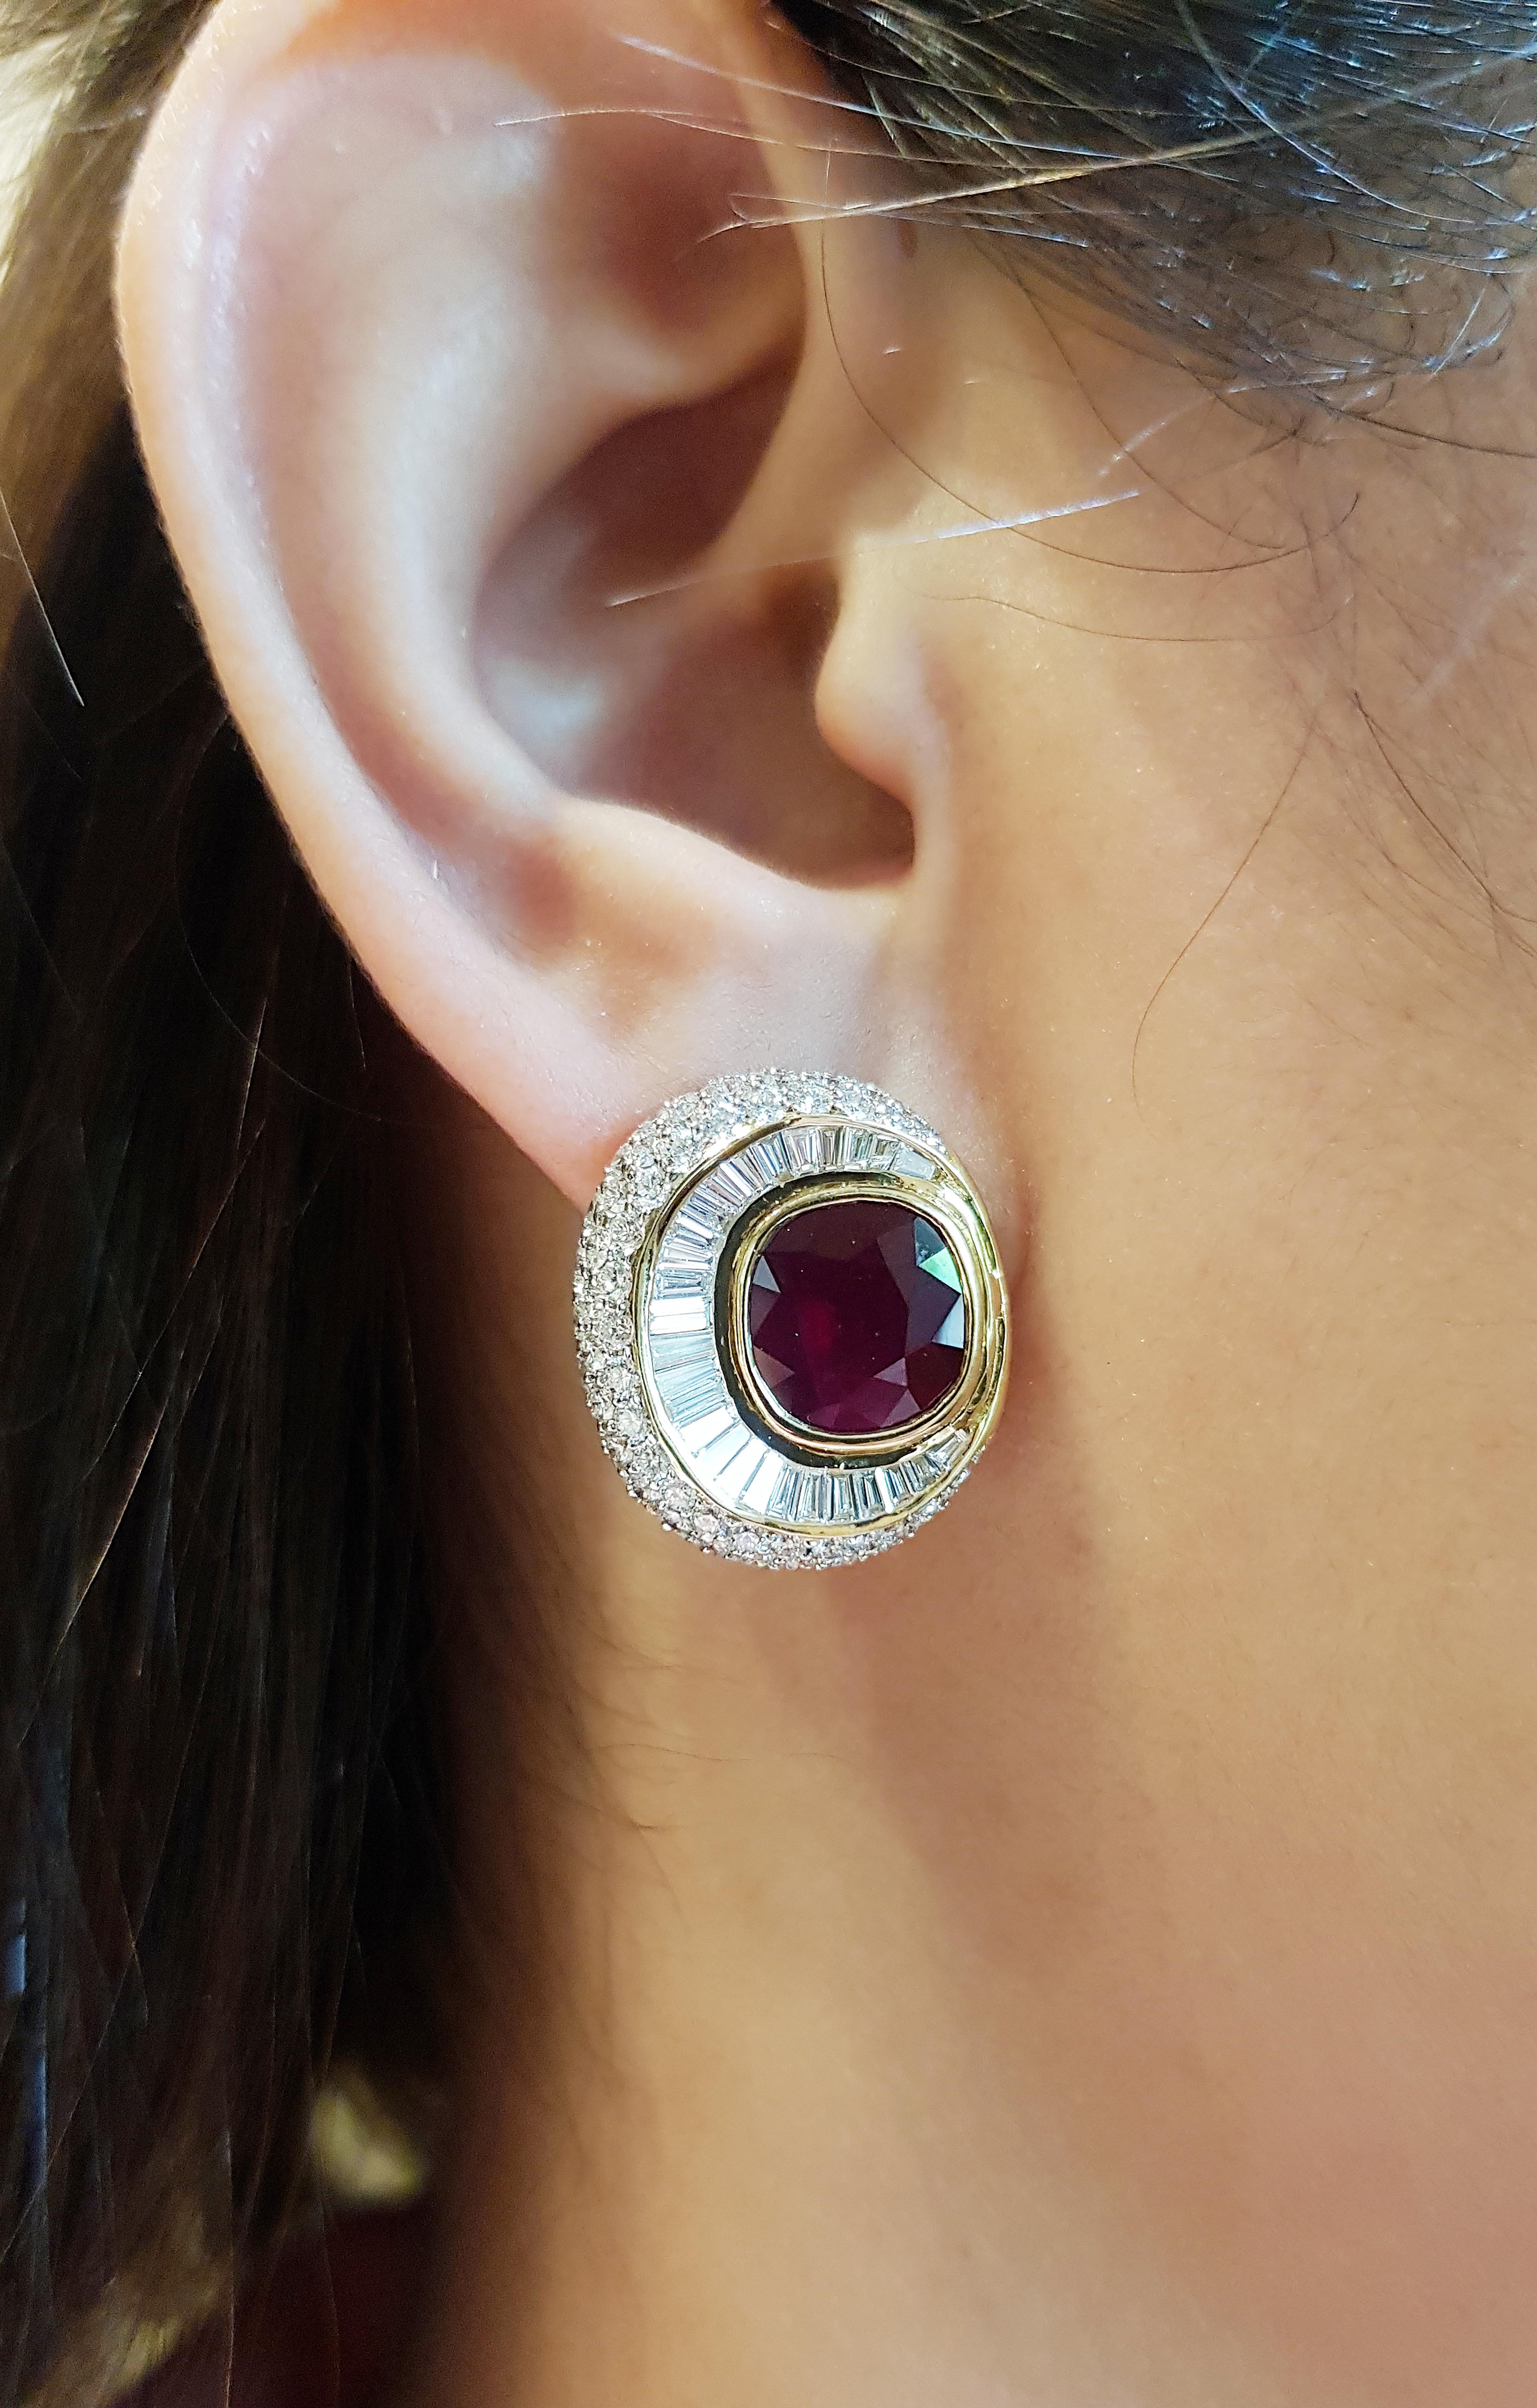 Ruby 5.72 carats with Diamond 3.37 carats Earrings set in 18 Karat Gold Settings

Width:  1.9 cm 
Length: 2.0 cm
Total Weight: 14.84 grams

